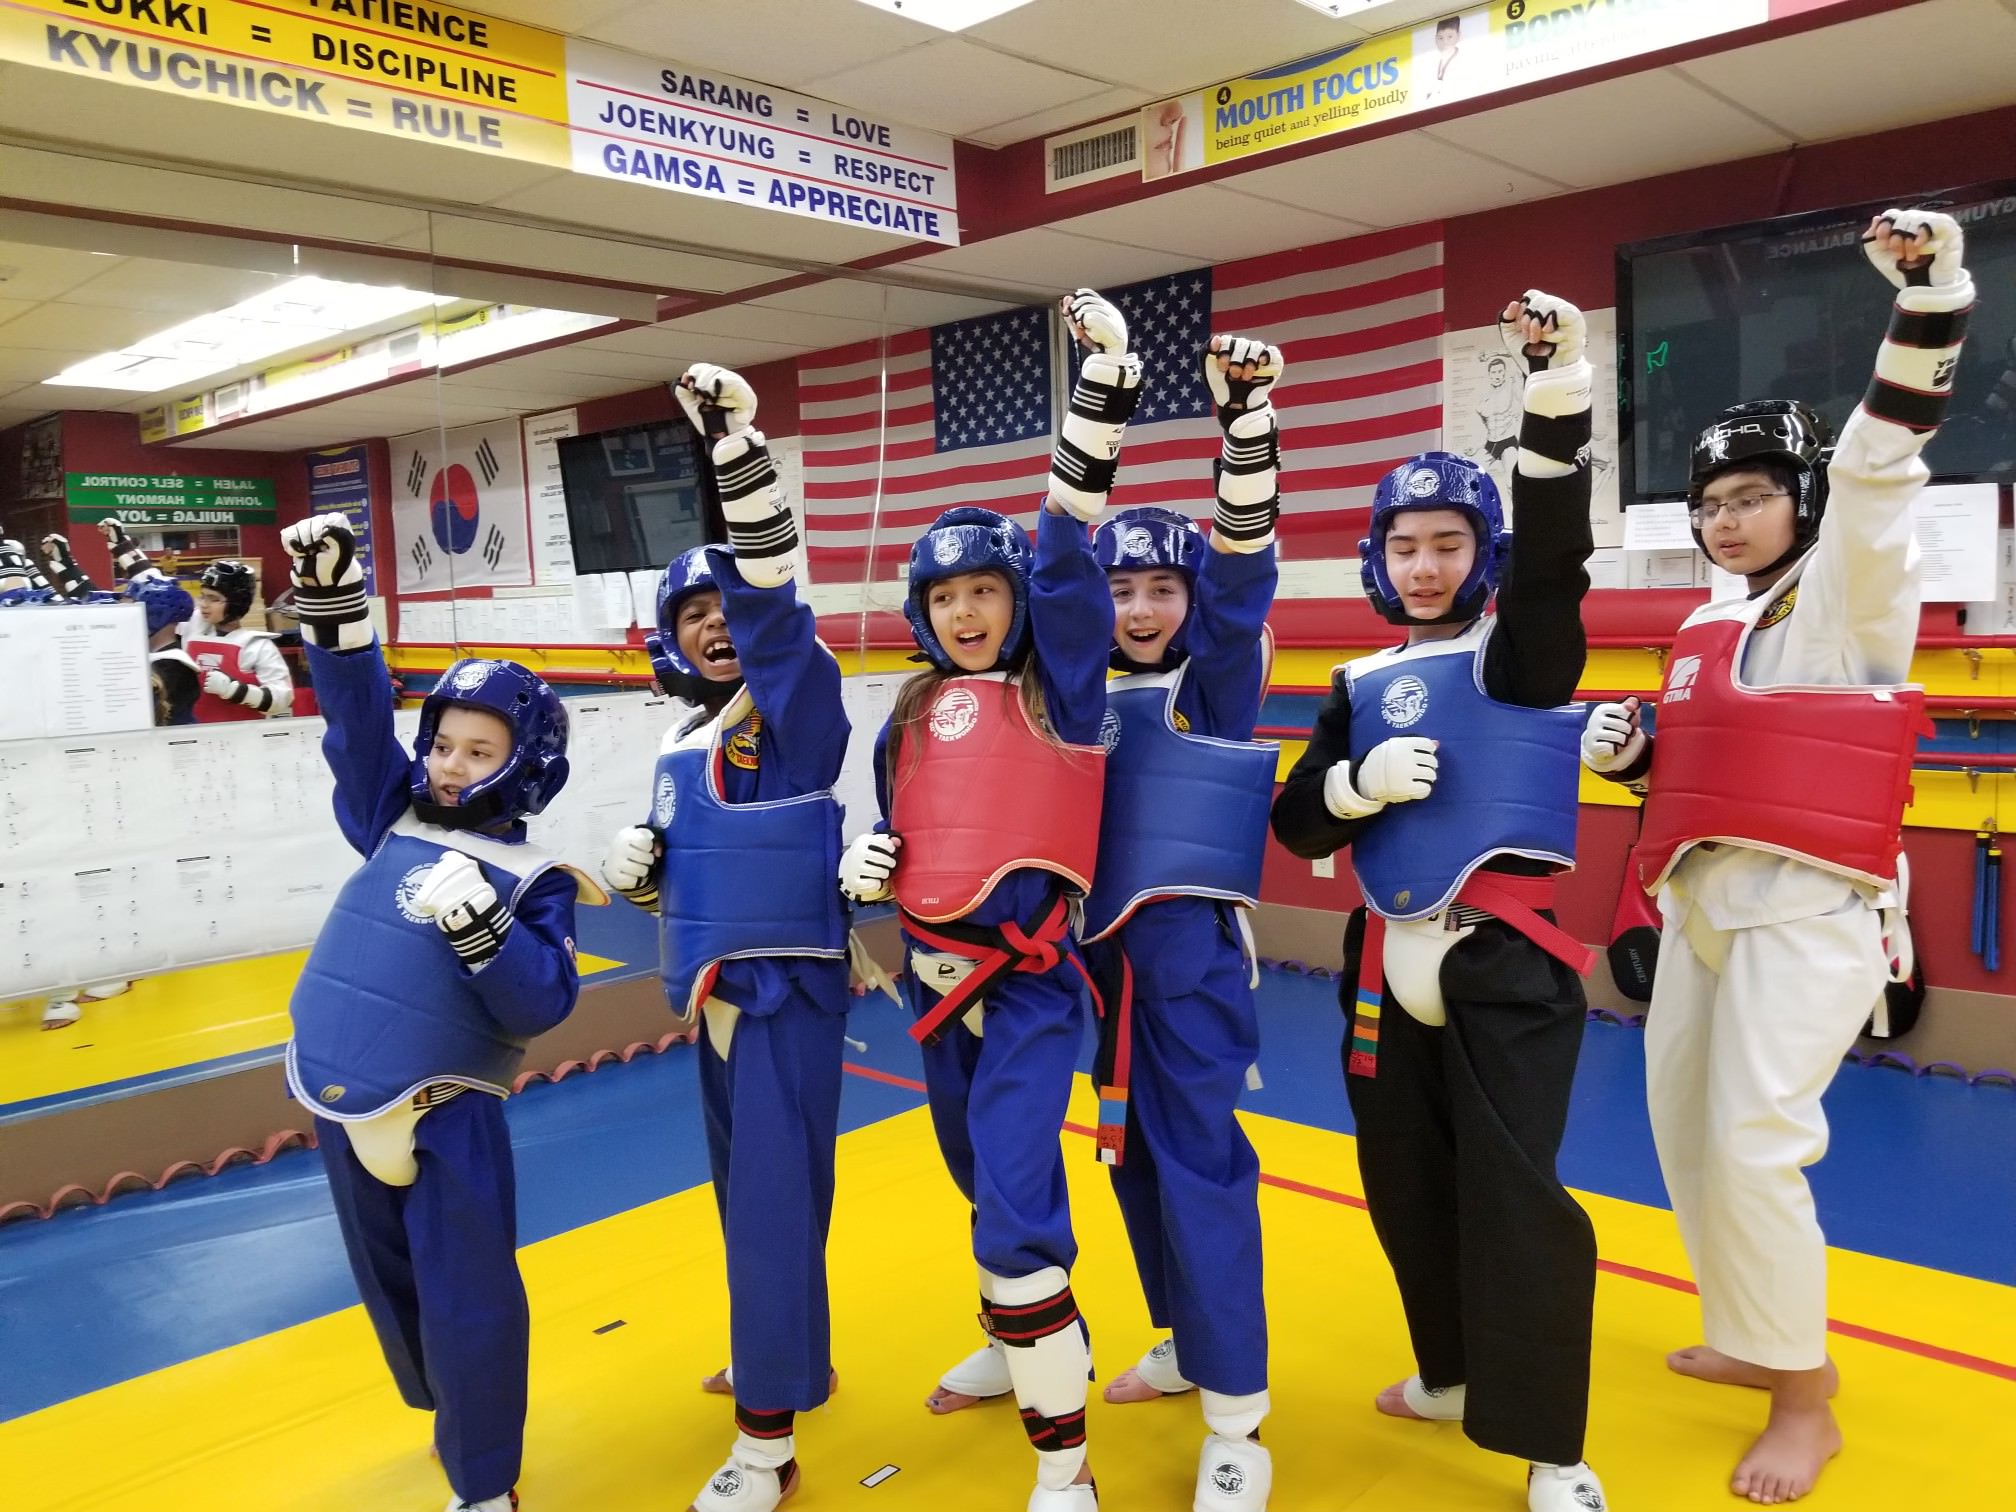 kctkd.net -- Ko's Tae Kwon Do Class for Children and Teens